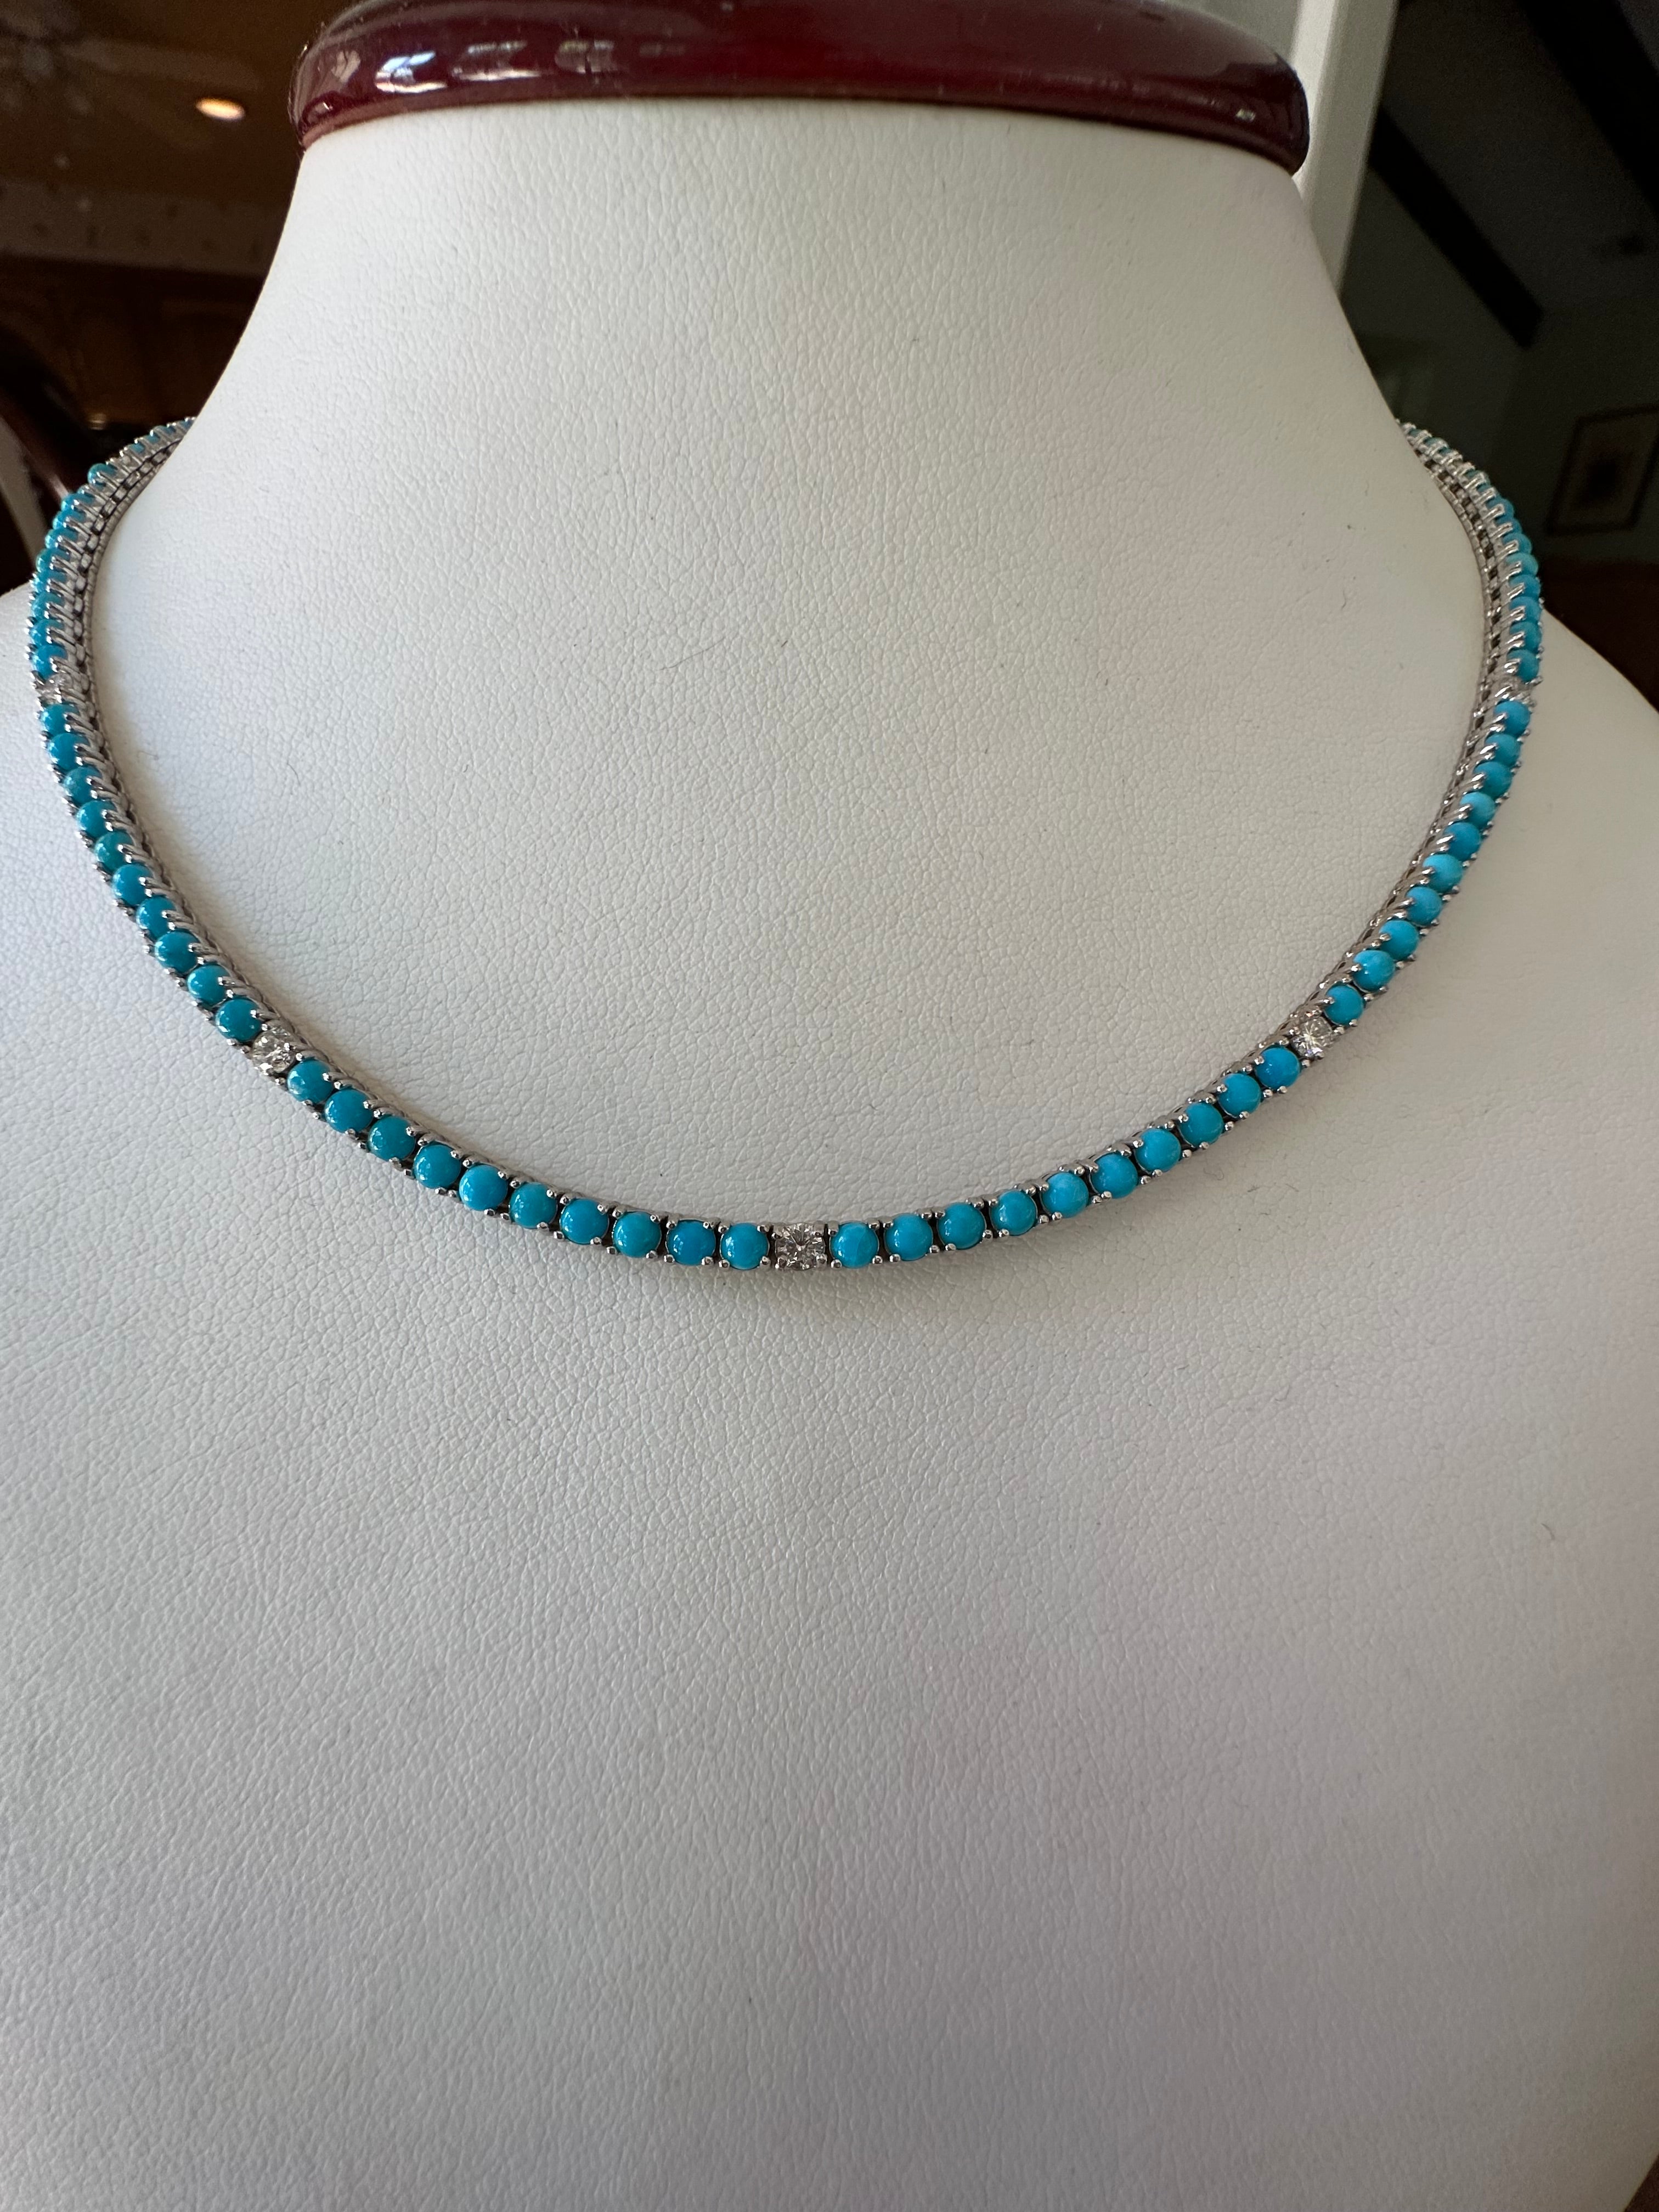 This exquisite tennis necklace set in 14K white gold features one hundred twenty-two natural fine turquoise round-shaped cabochons-- all hand cut to match-- interspersed with nine natural white round brilliant-cut diamonds totaling 0.90 carats, F-G